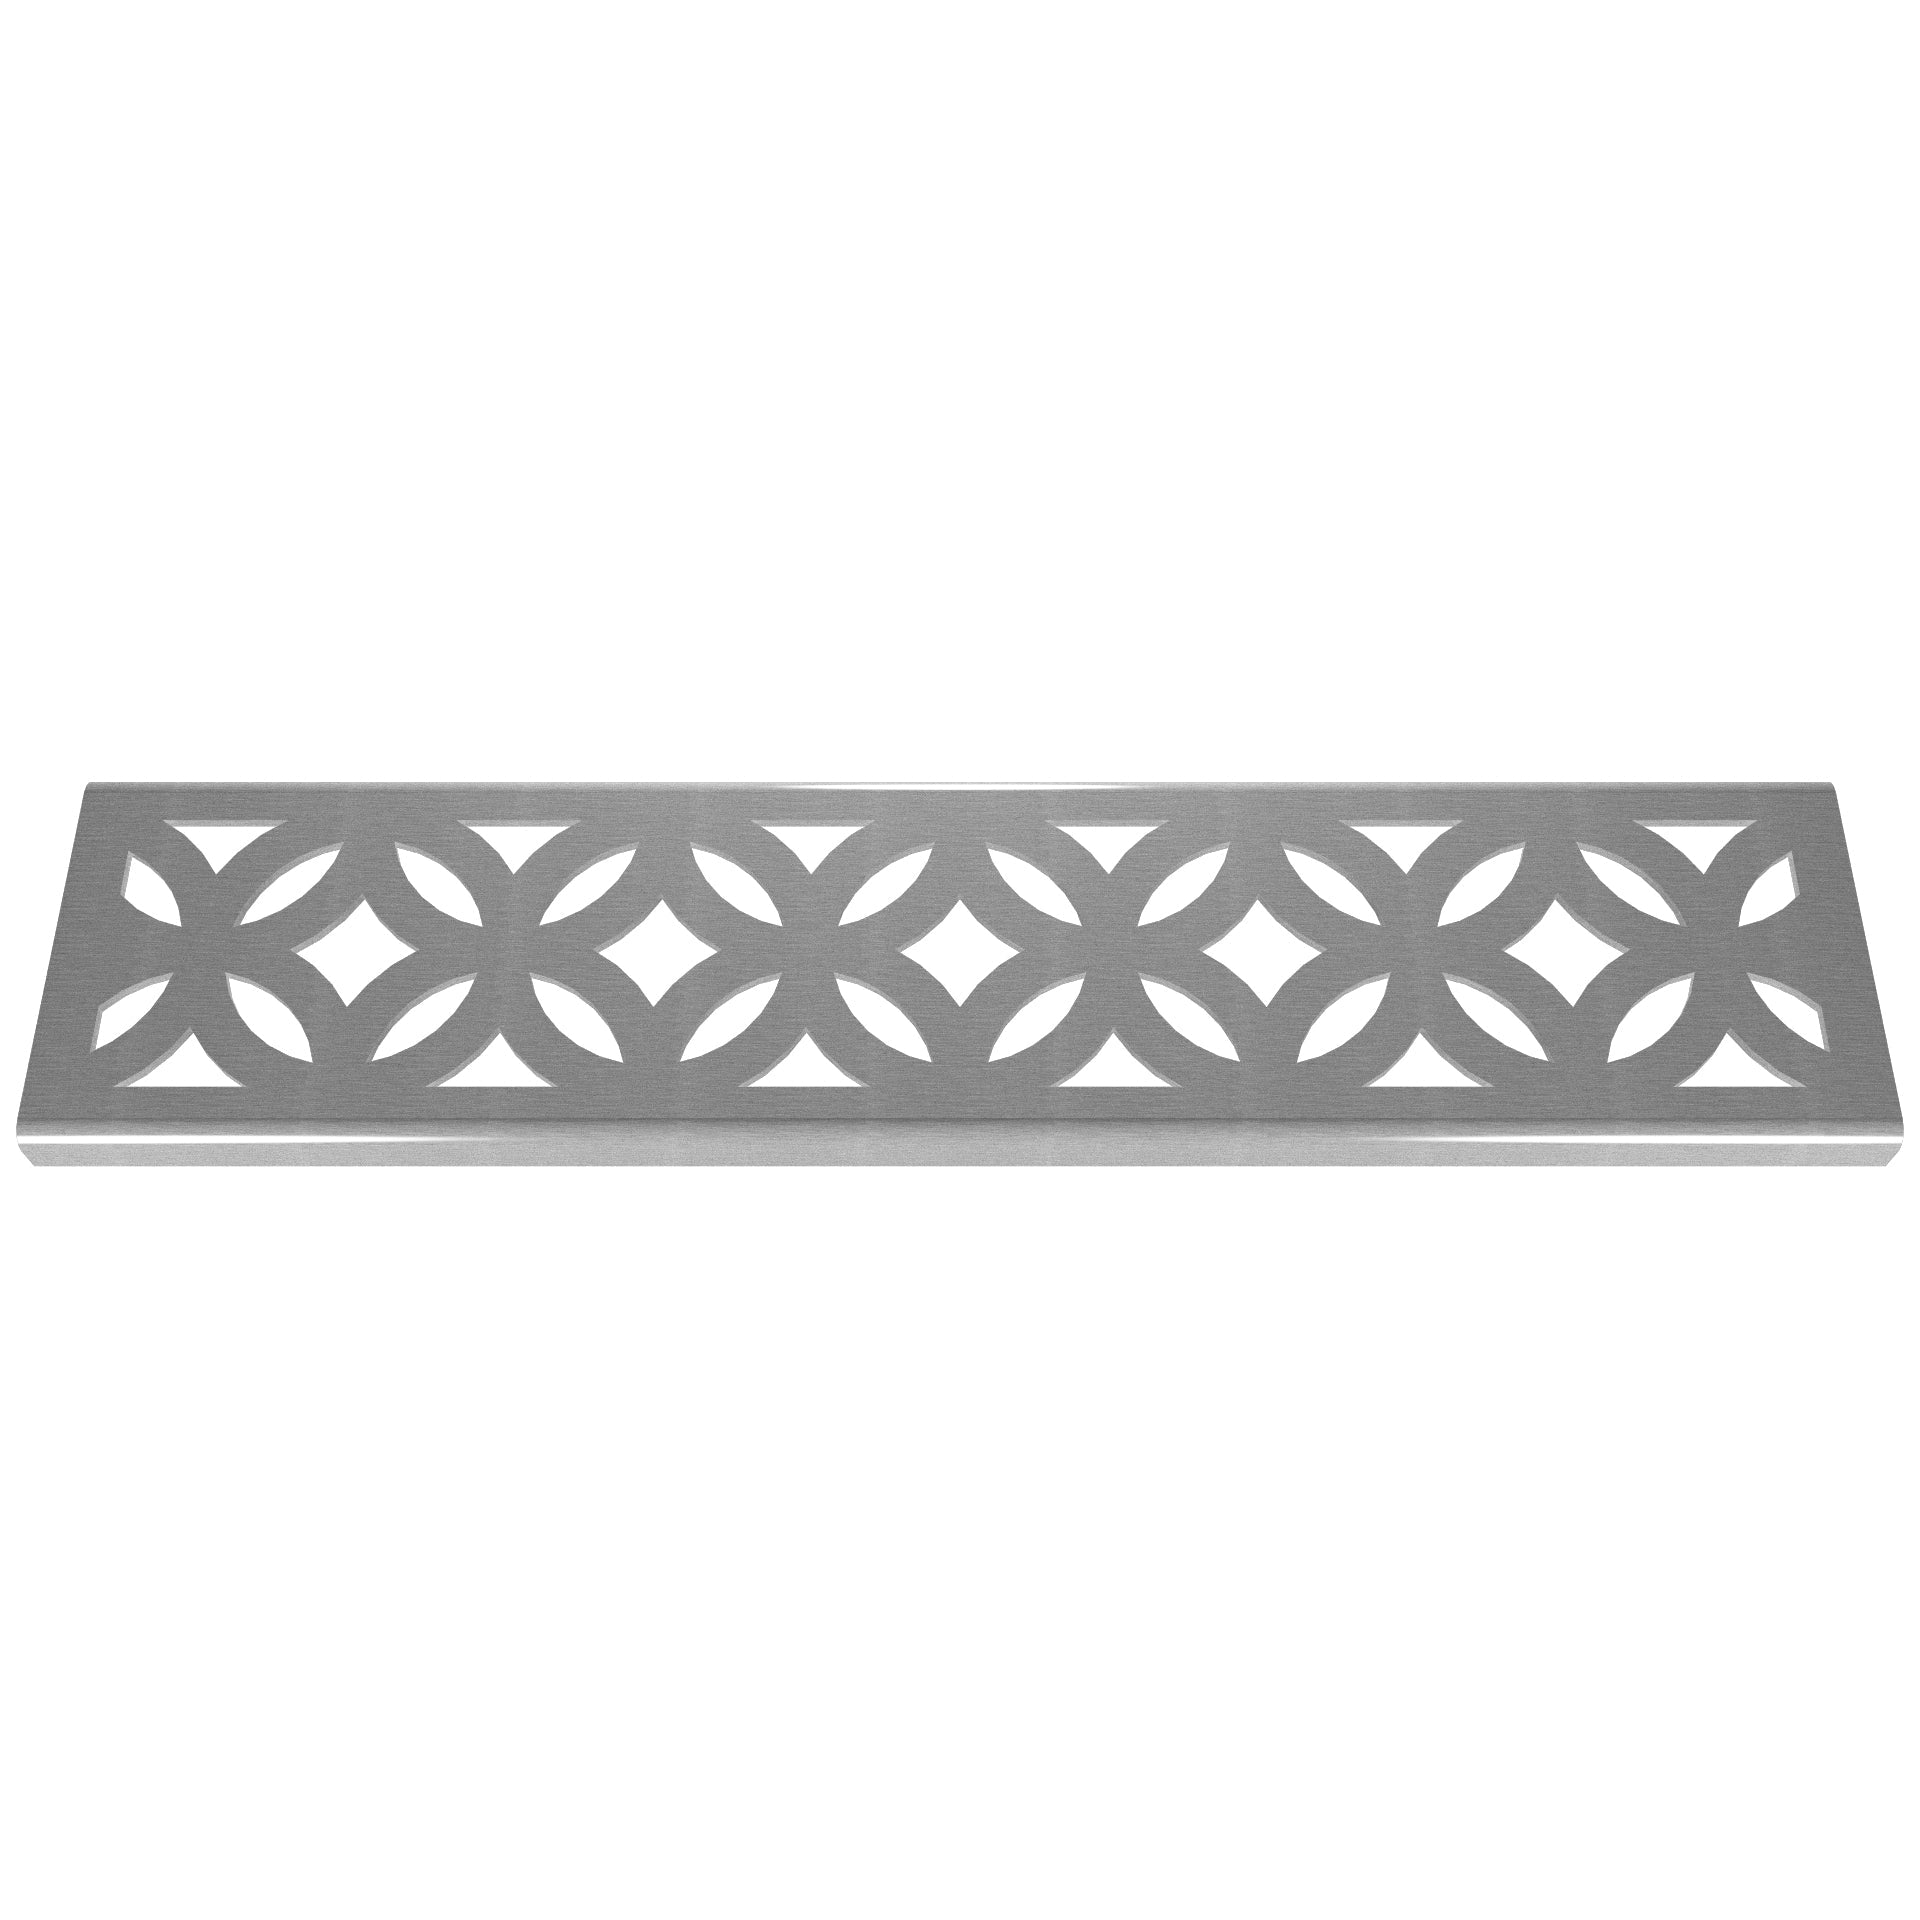 [CLEARANCE] Archez 304 Stainless Steel Channel Drain Grate 75 x 913mm (3 Inch)